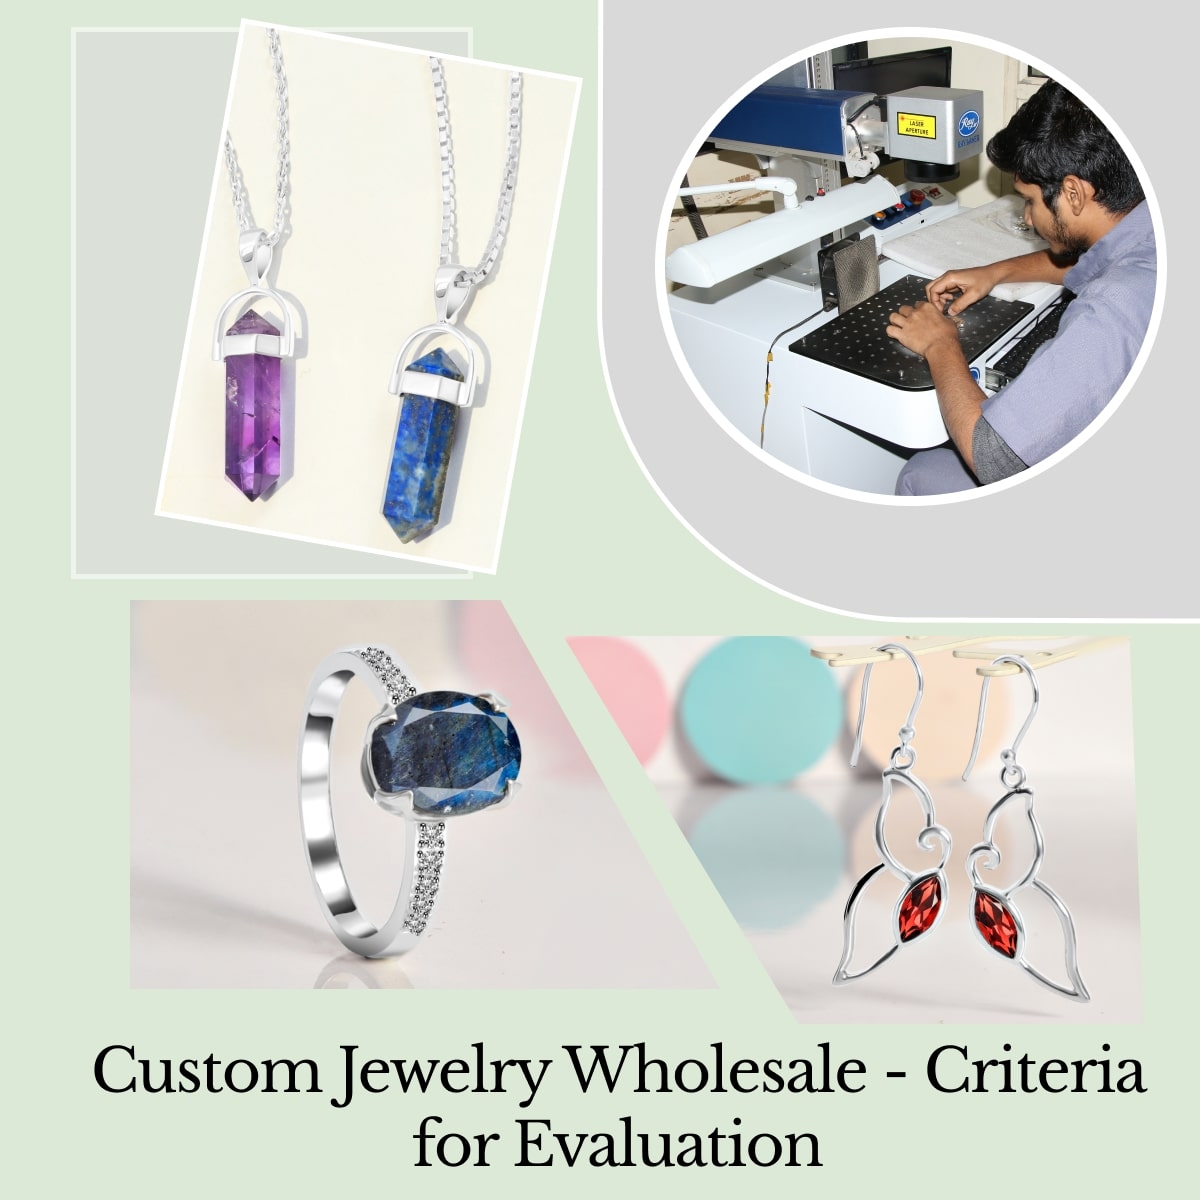 Things to Search For in a Custom Jewelry Wholesale Business